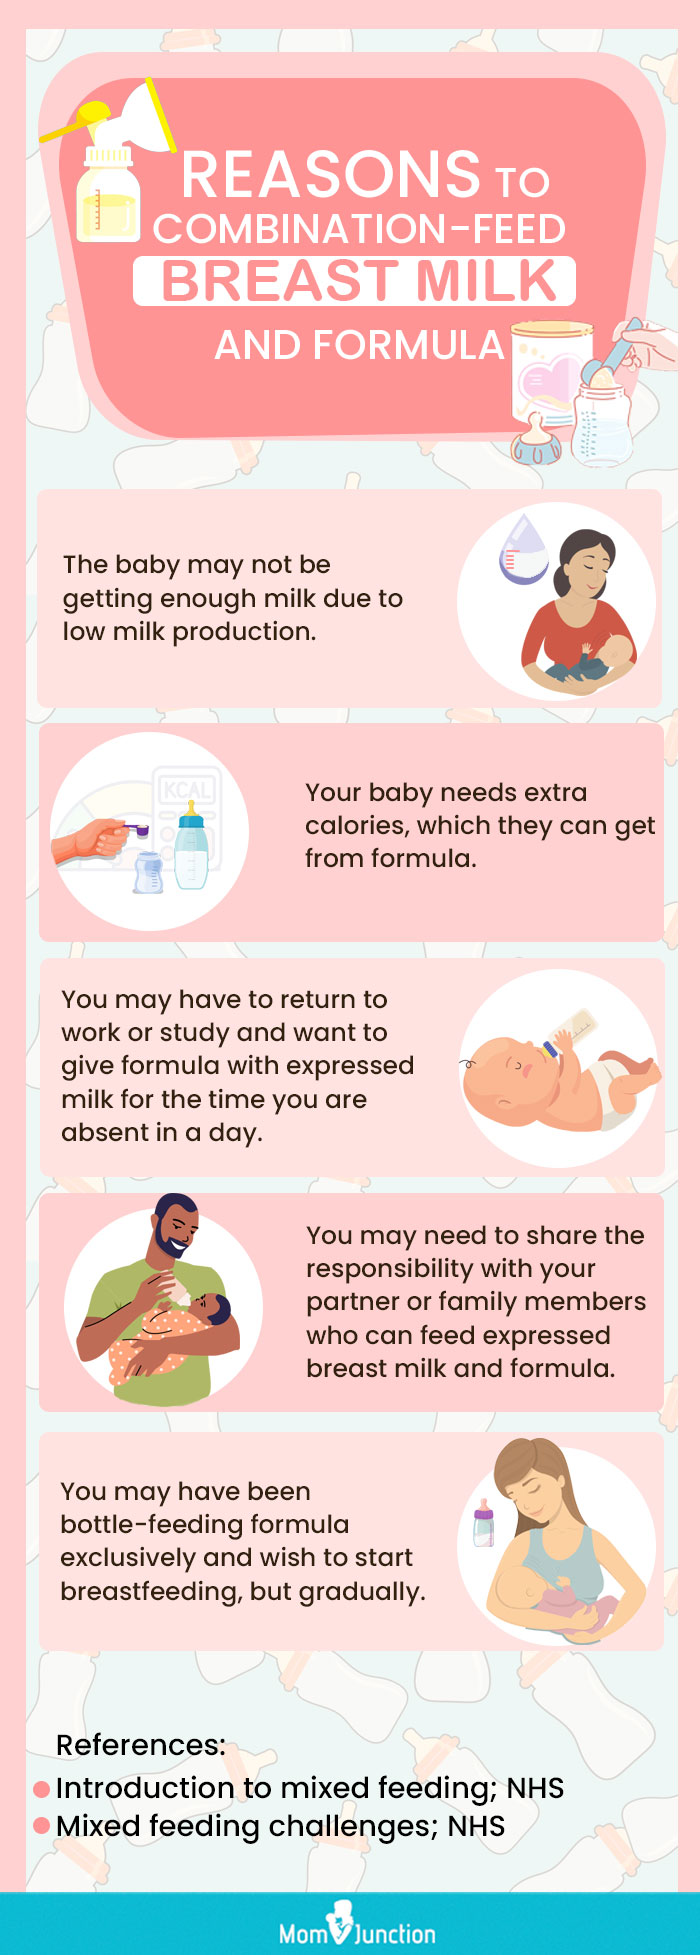 reasons to combination feed breast milk and formula (infographic)